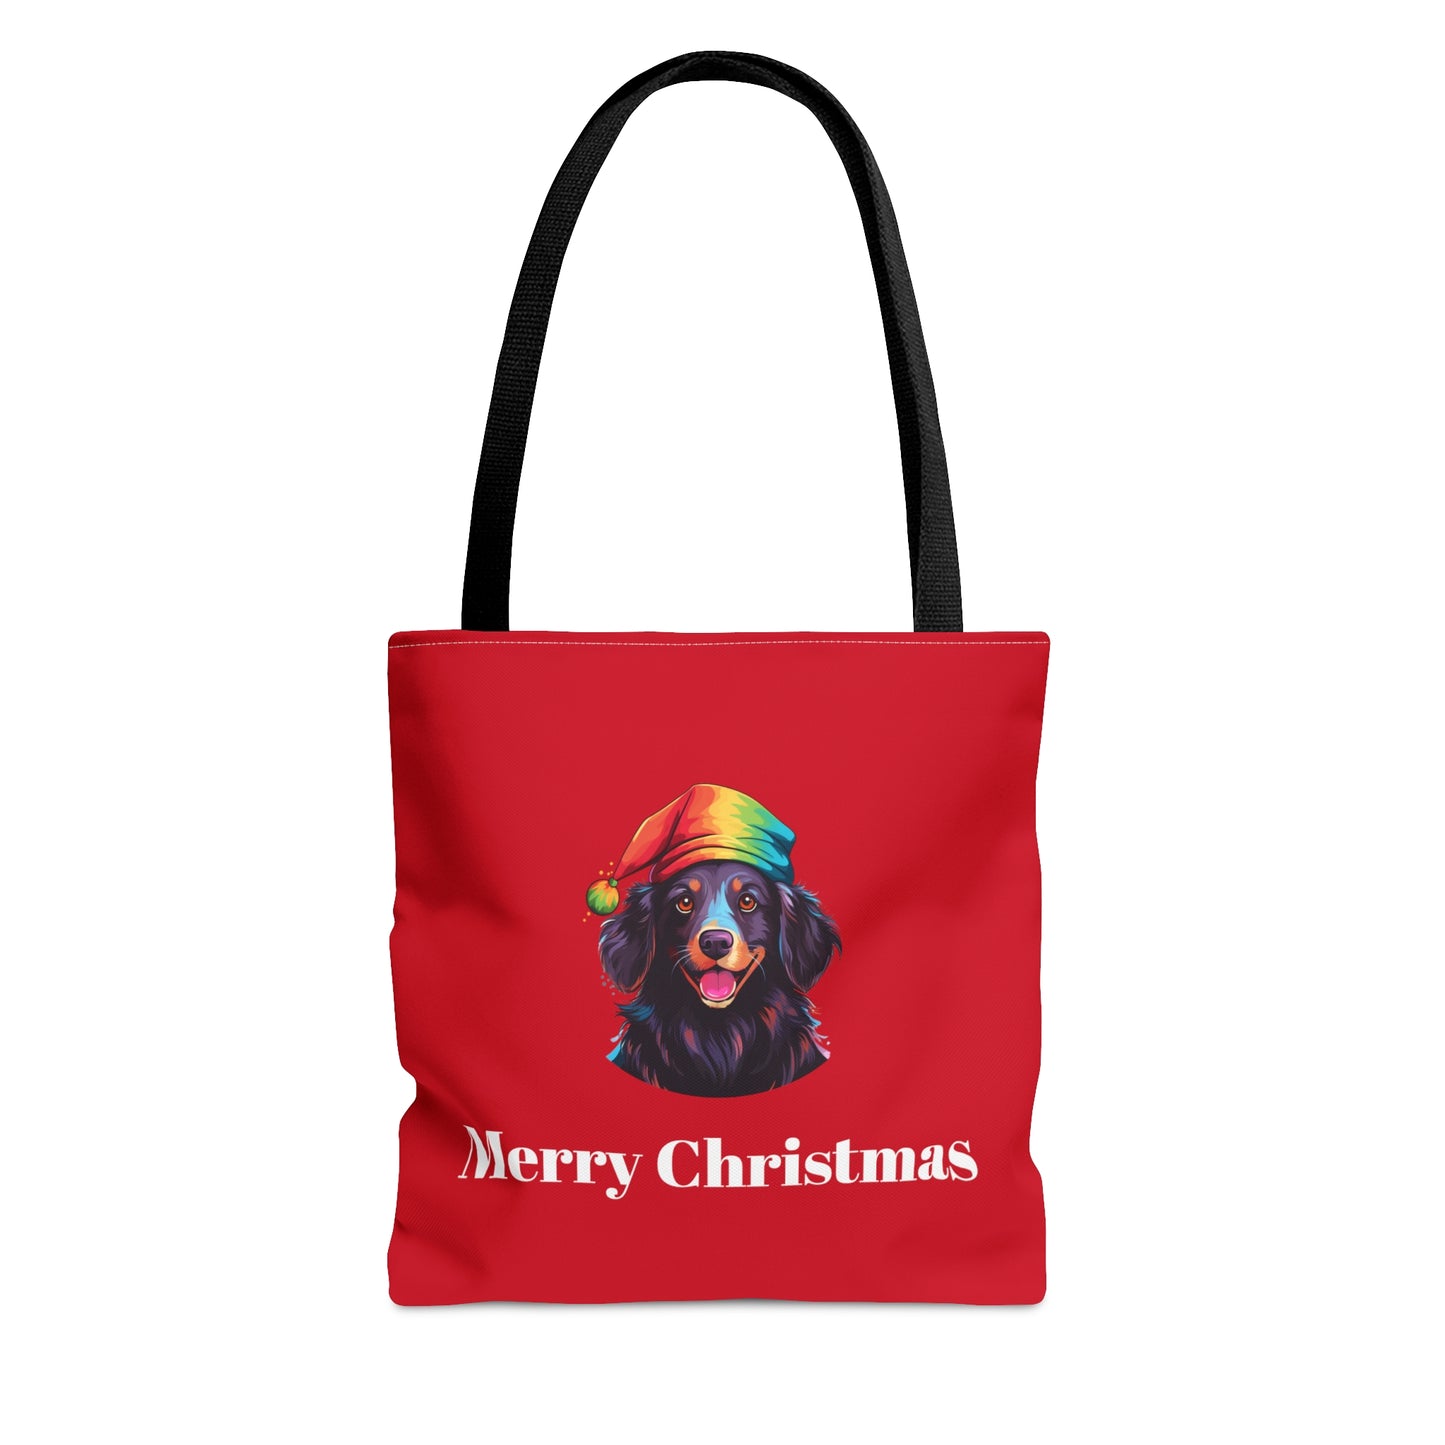 Puppy Merry Christmas Gift Tote Bag